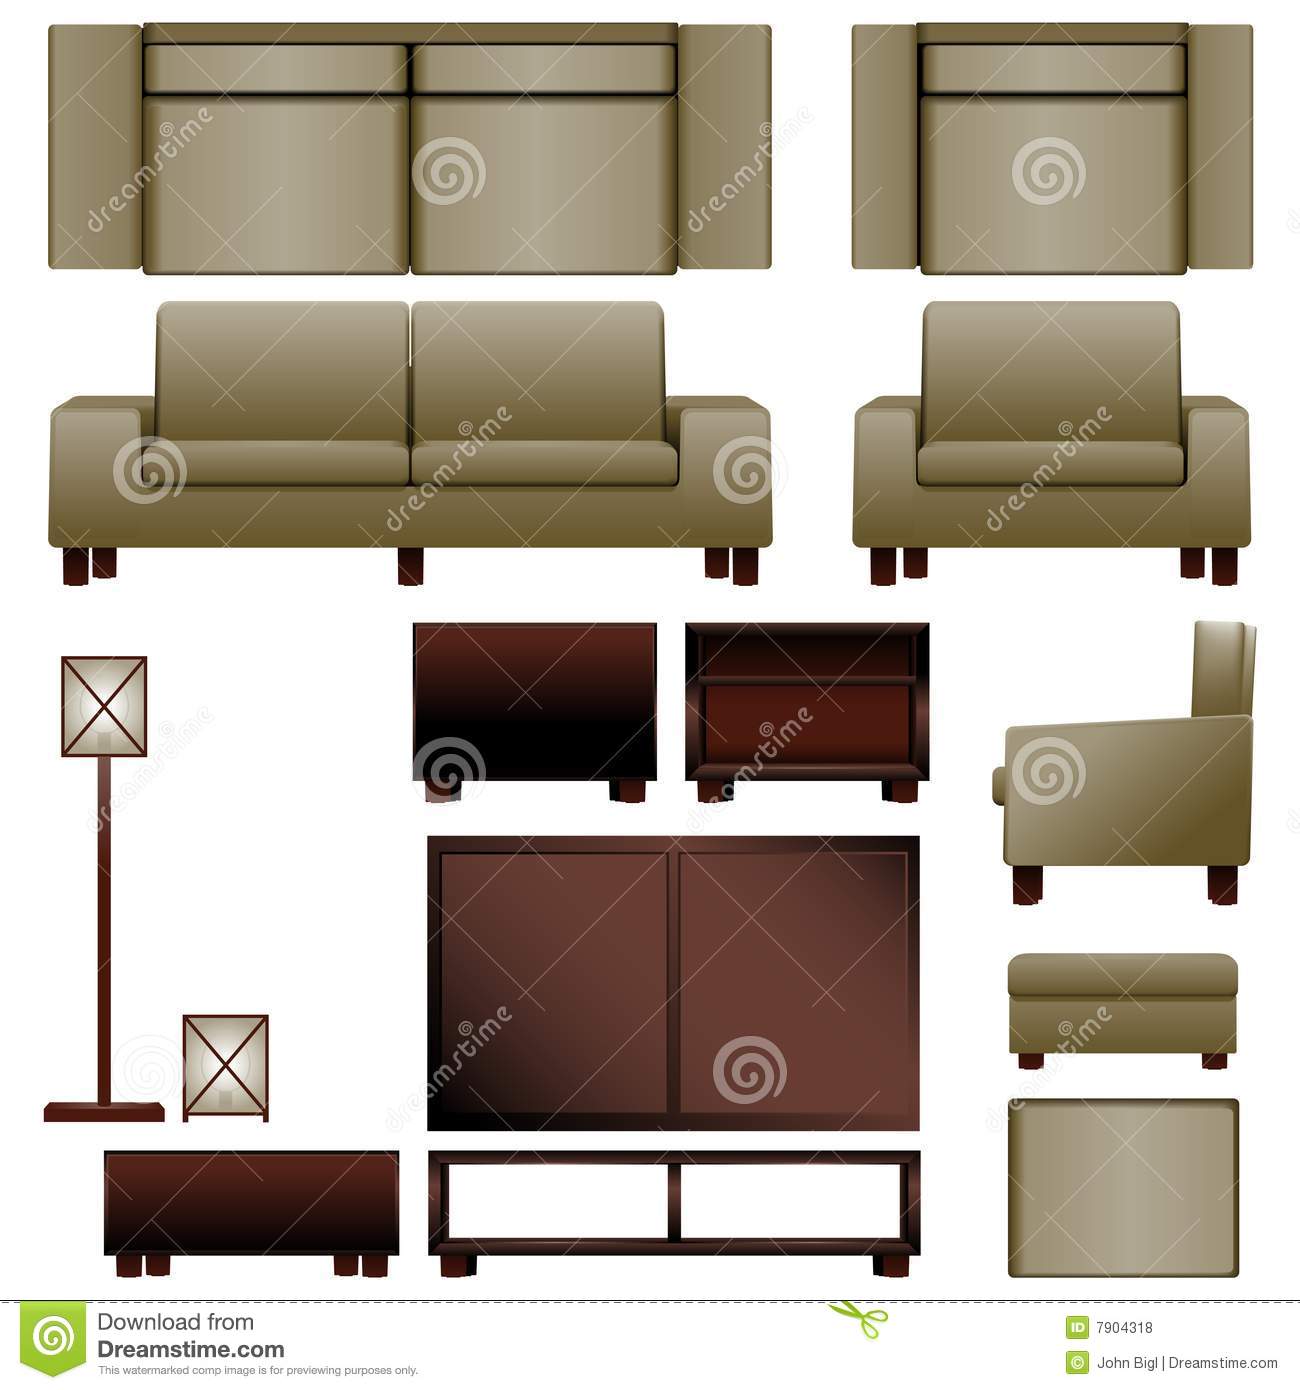     Clipart Couch Top View Displaying 17 Images For Clipart Couch Top View